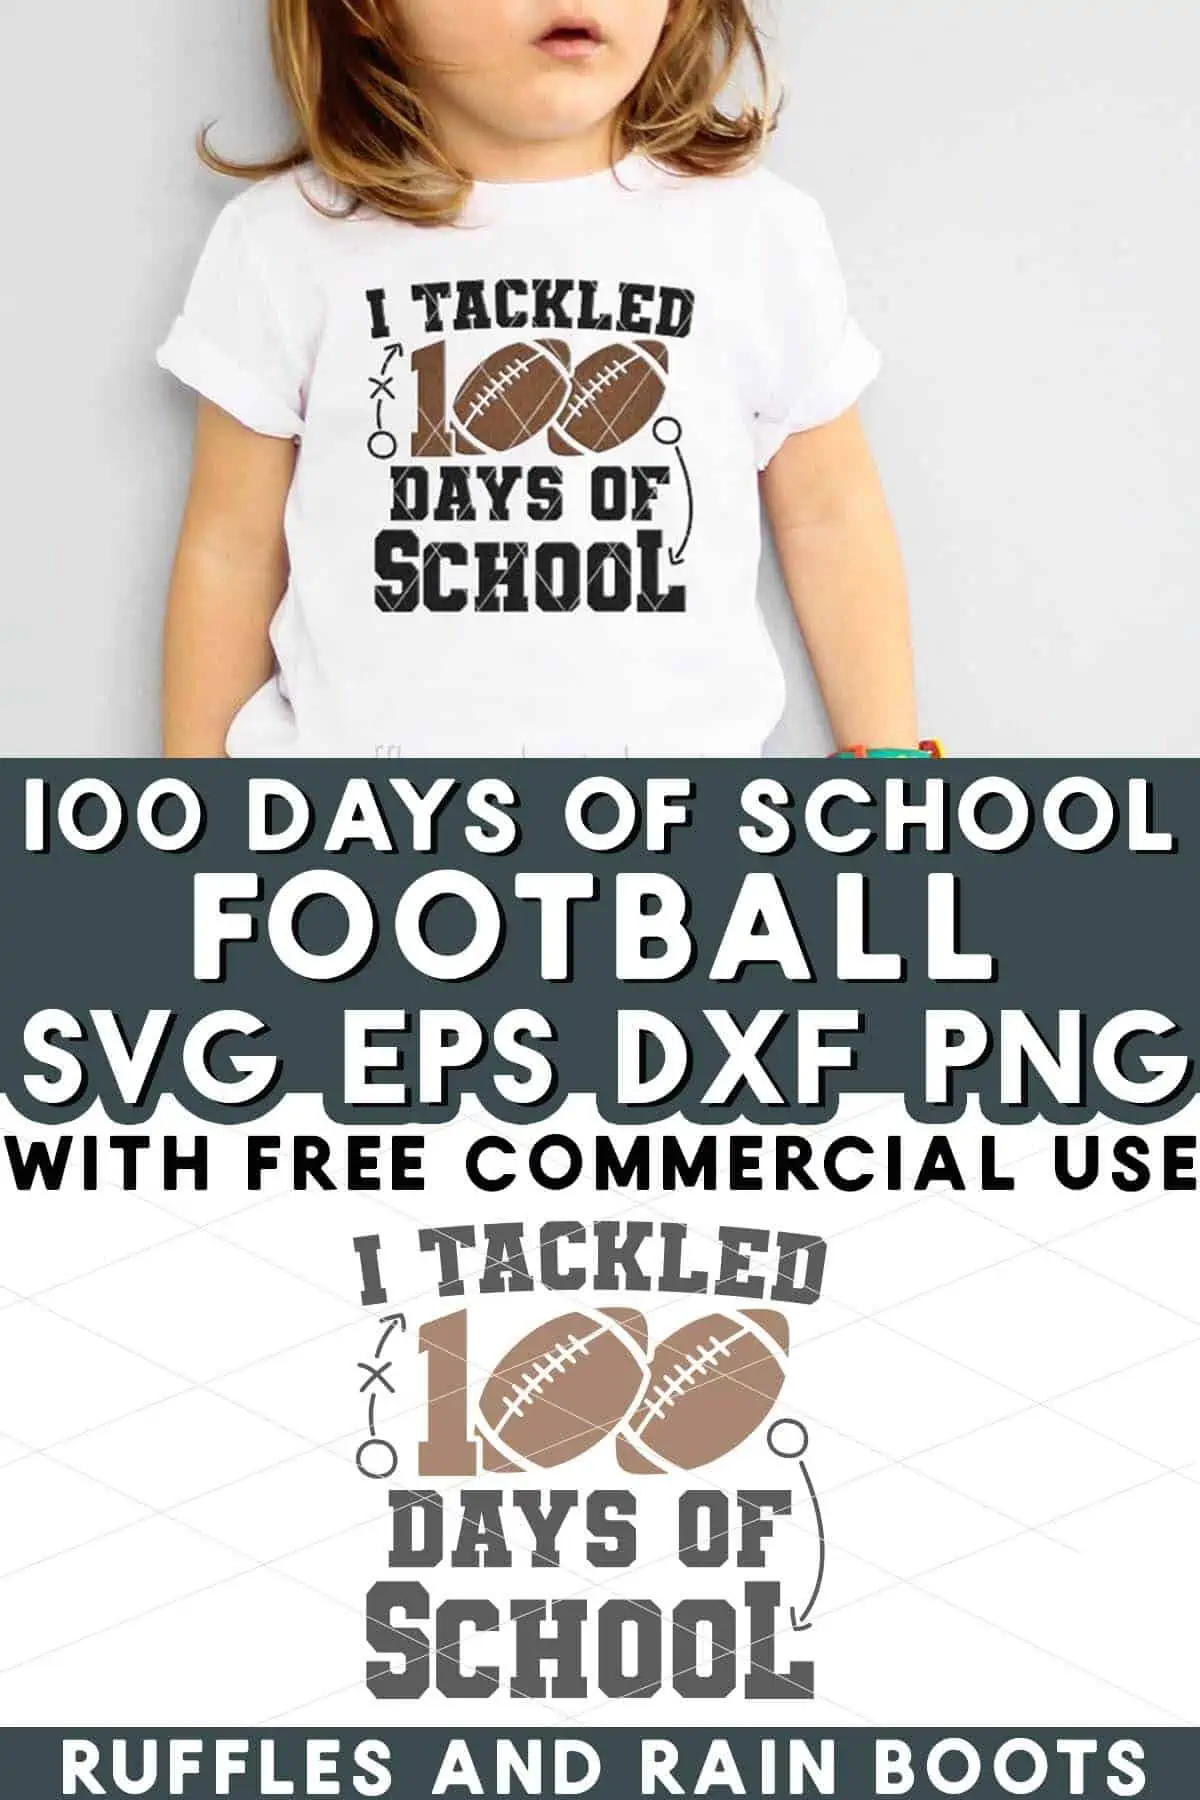 Split vertical image showing a young student wearing a white shirt with 100 days of school and footballs.